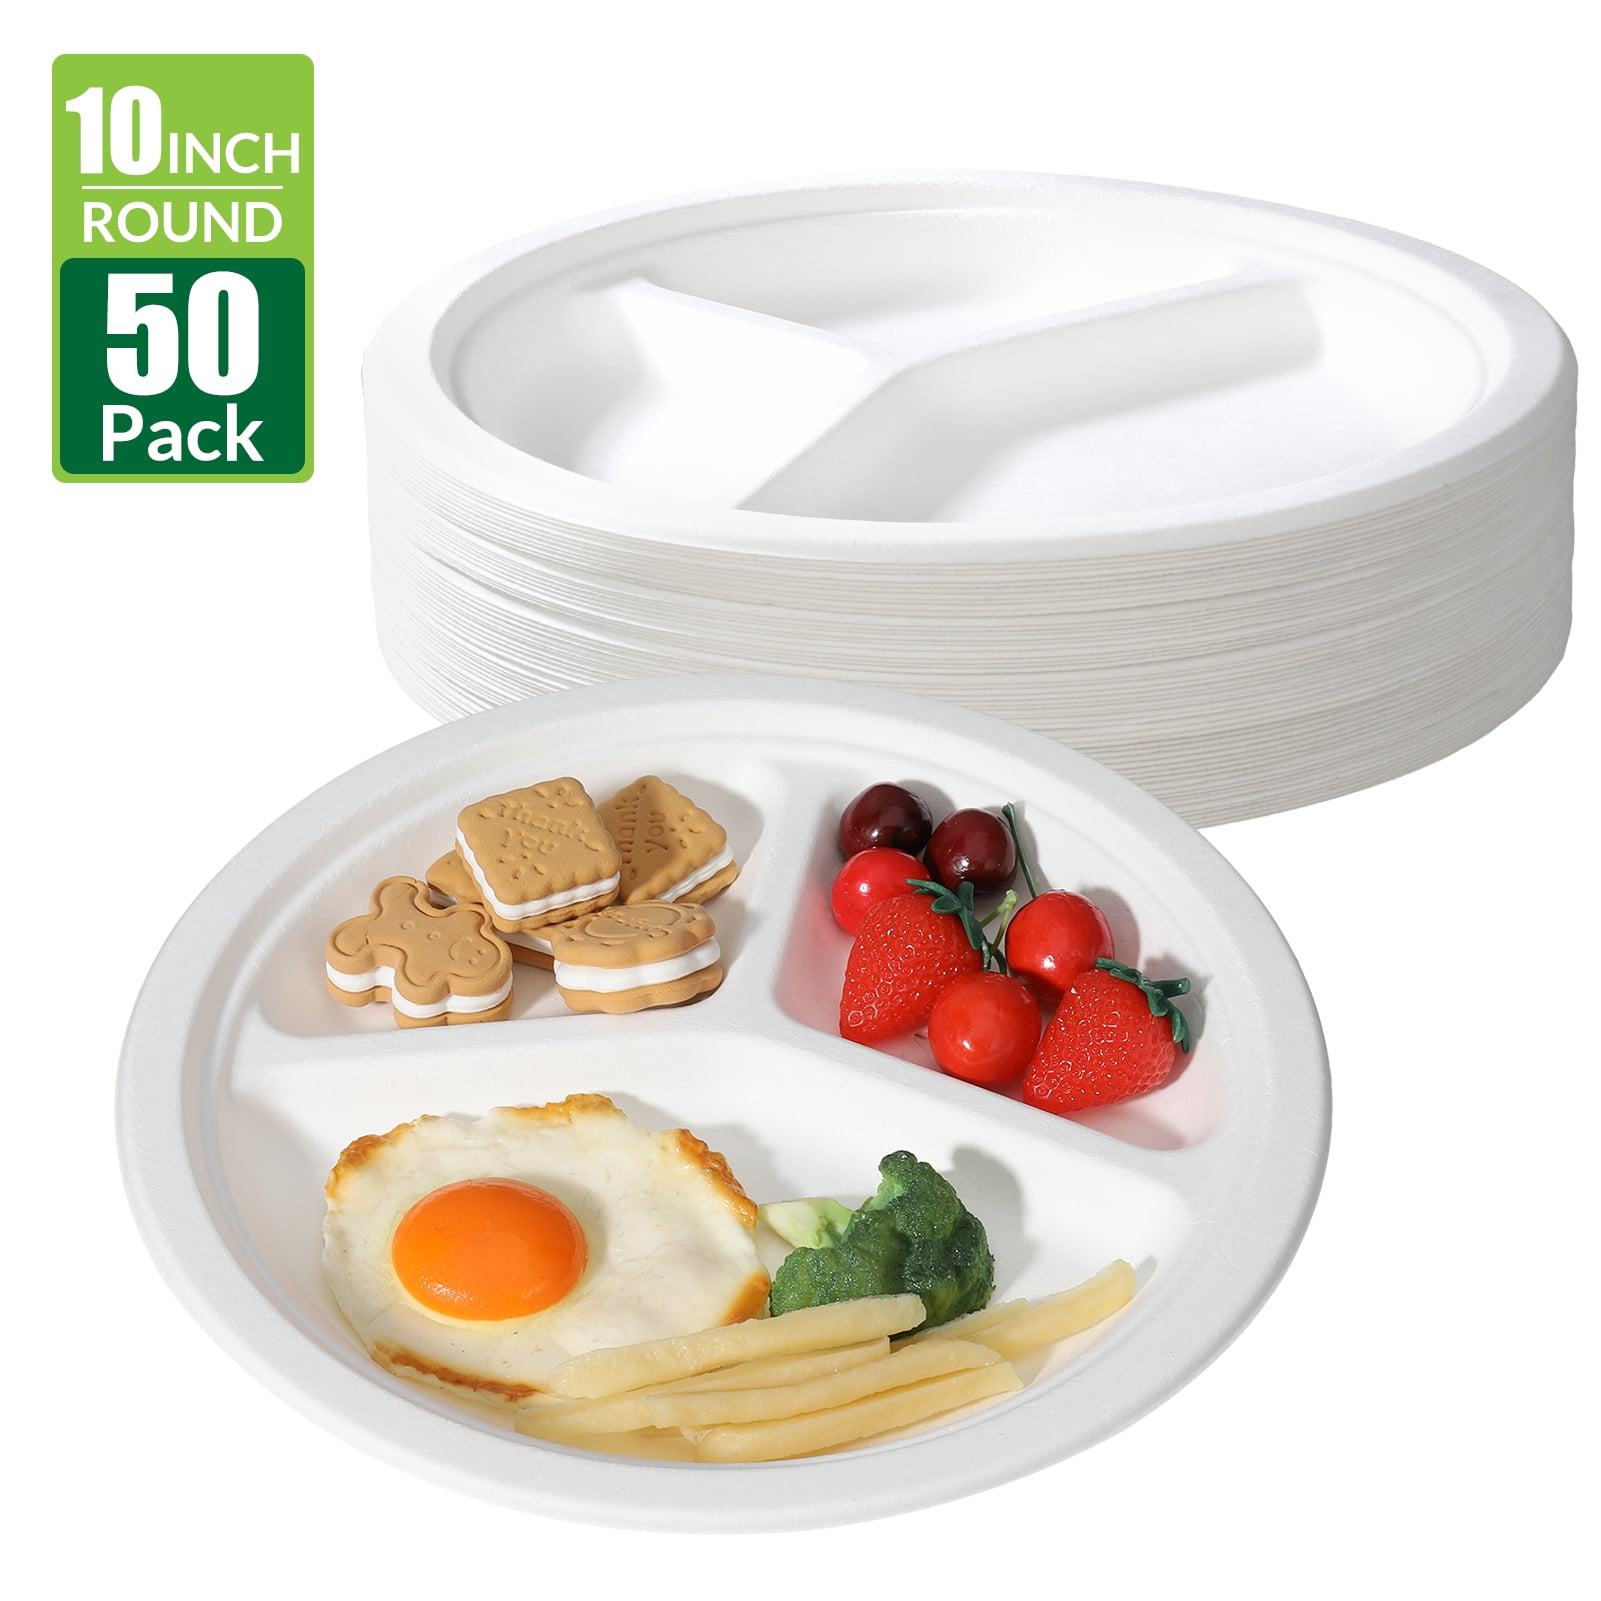 [700 Pack] White Disposable Paper Plates 9 inch by EcoQuality - Perfect for Parties, BBQ, Catering, Office, Event's, Pizza, Restaurants, Recyclable